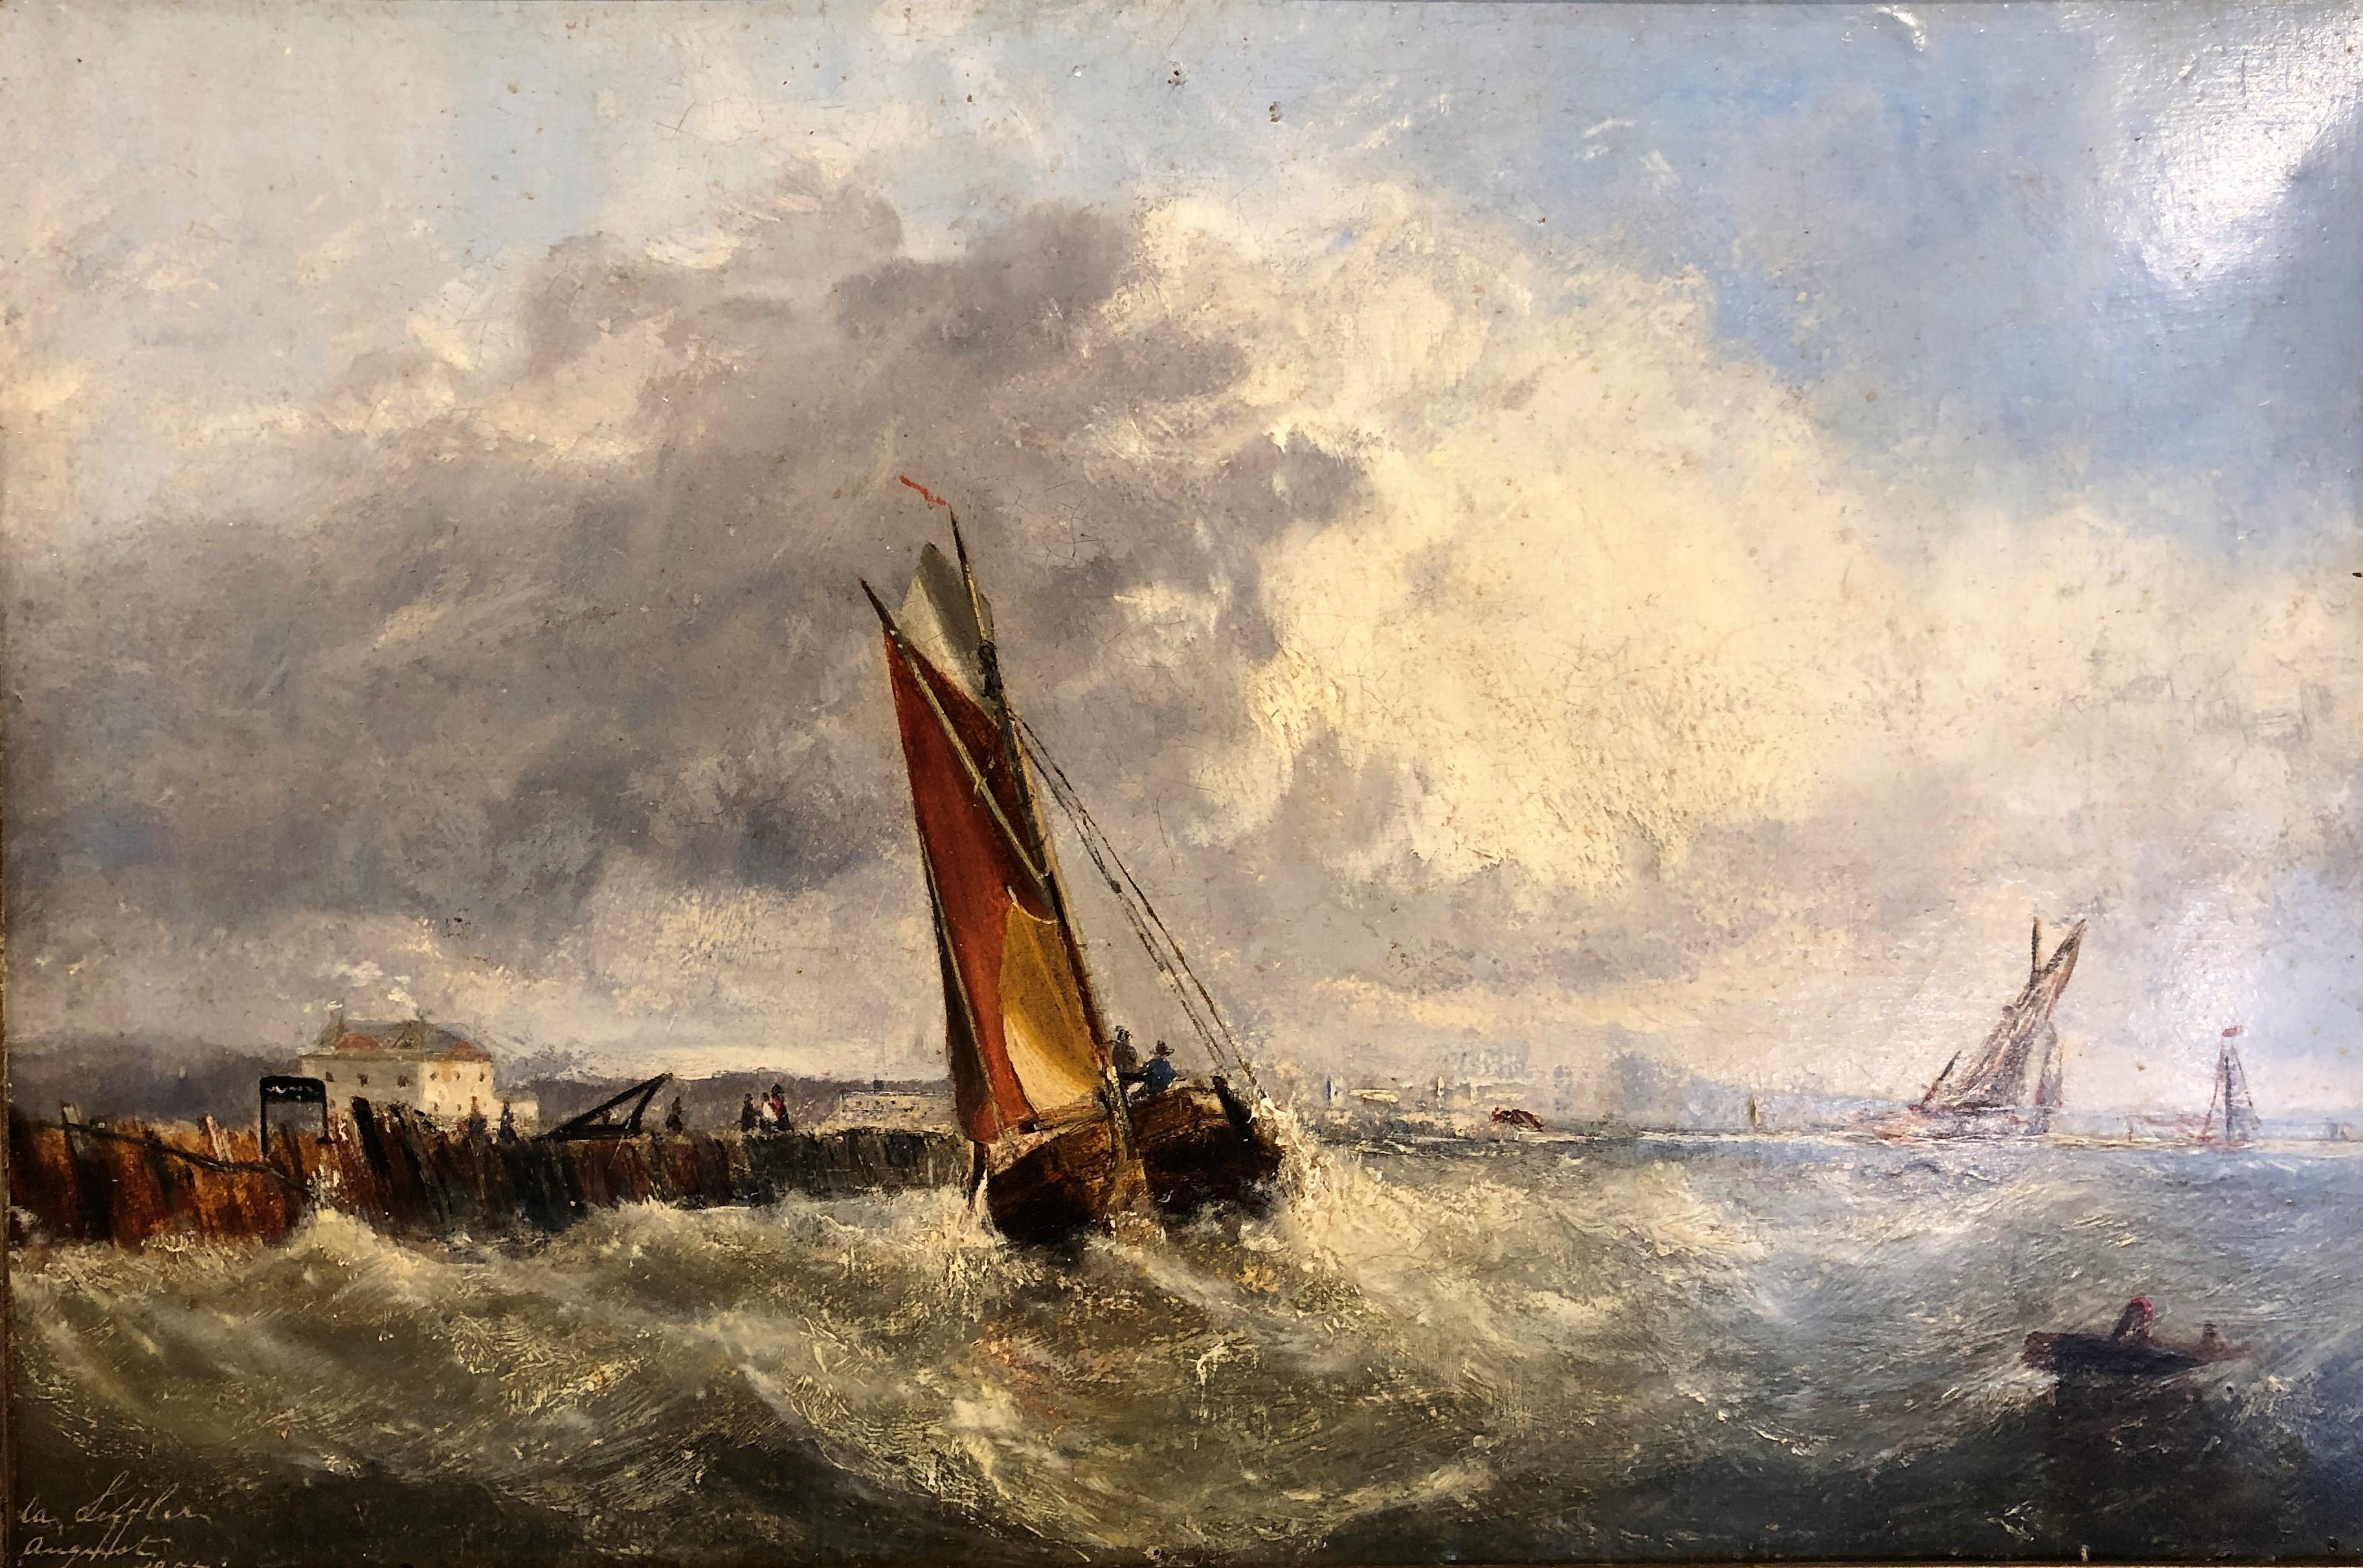 OLD MASTER OIL PAINTING High Quality 19th CENTURY Stormy Seas Gold Gilt Frame - Brown Landscape Painting by James Edward Meadows